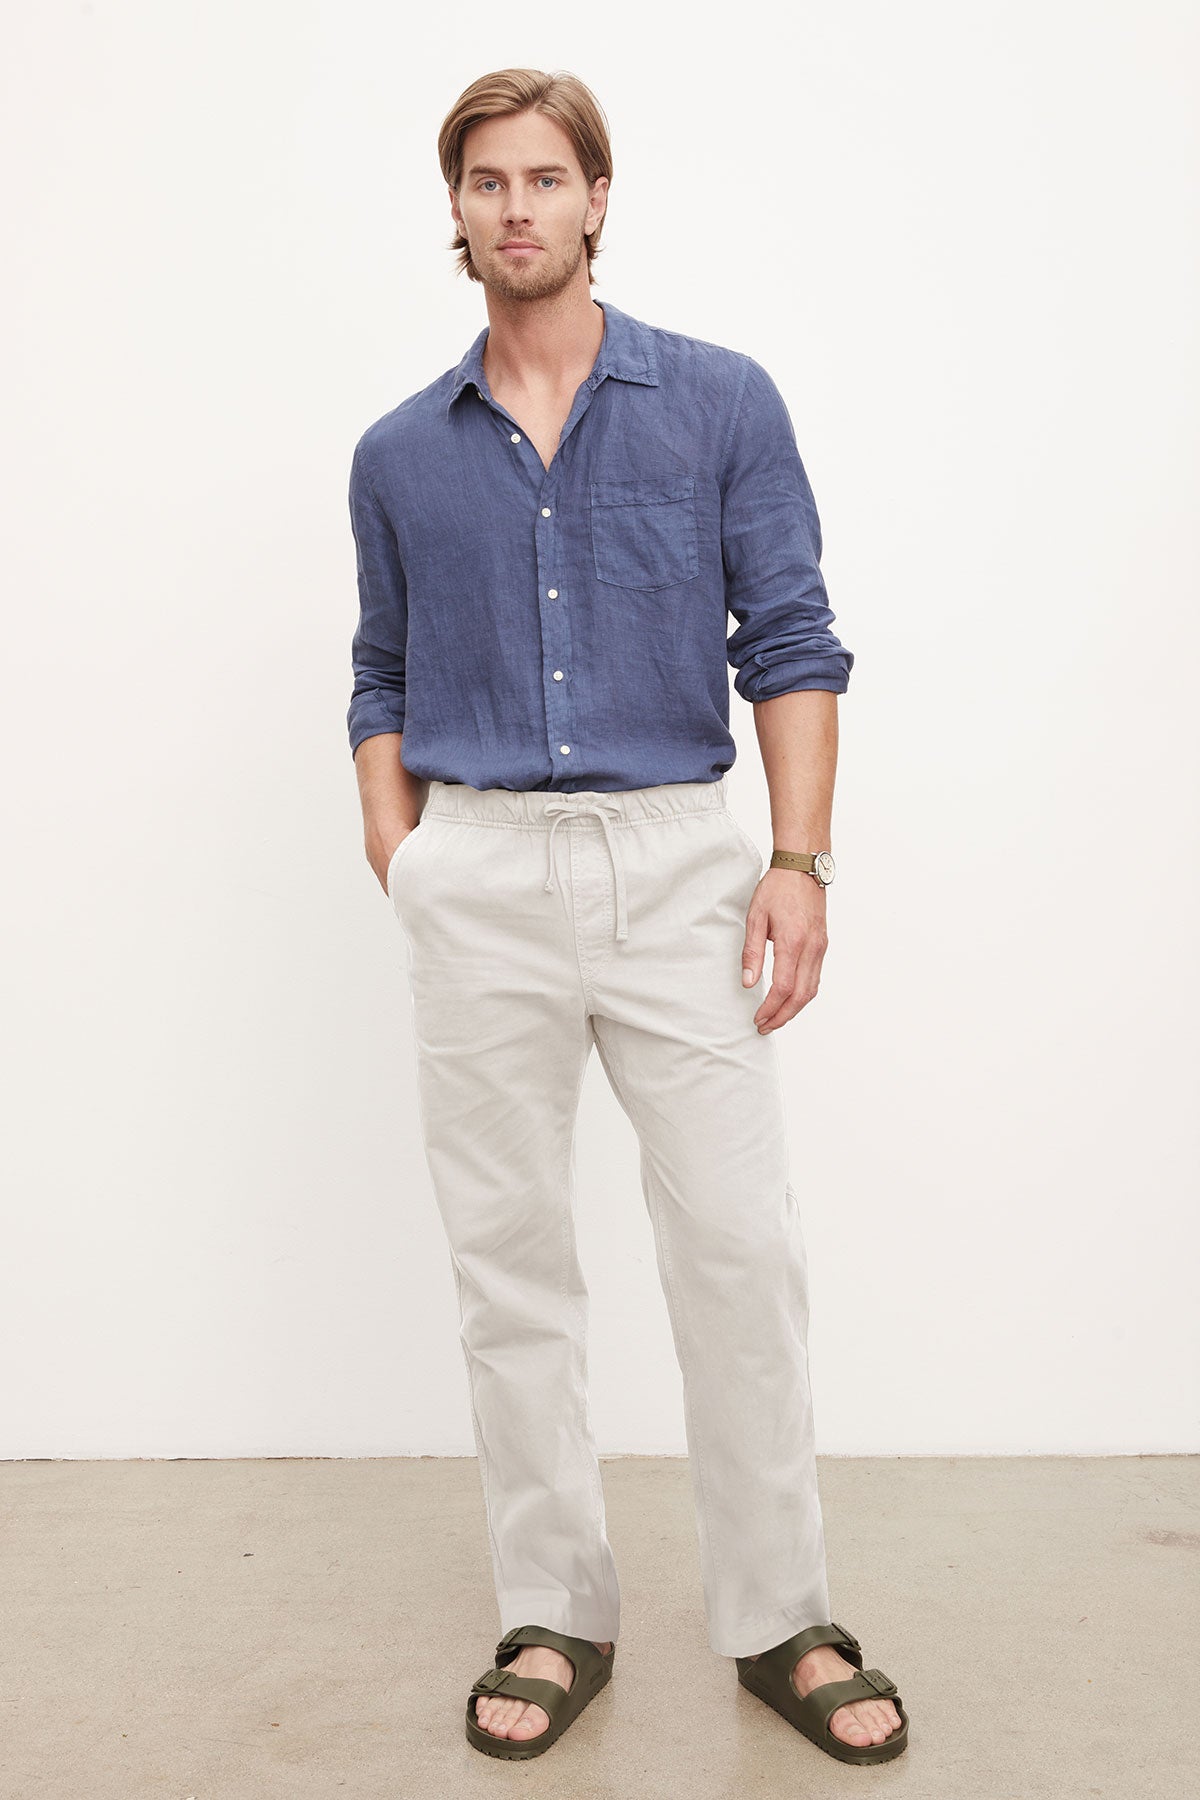 A man in a casual blue shirt and Velvet by Graham & Spencer BRANSON PANT, standing against a plain background.-36329591111873